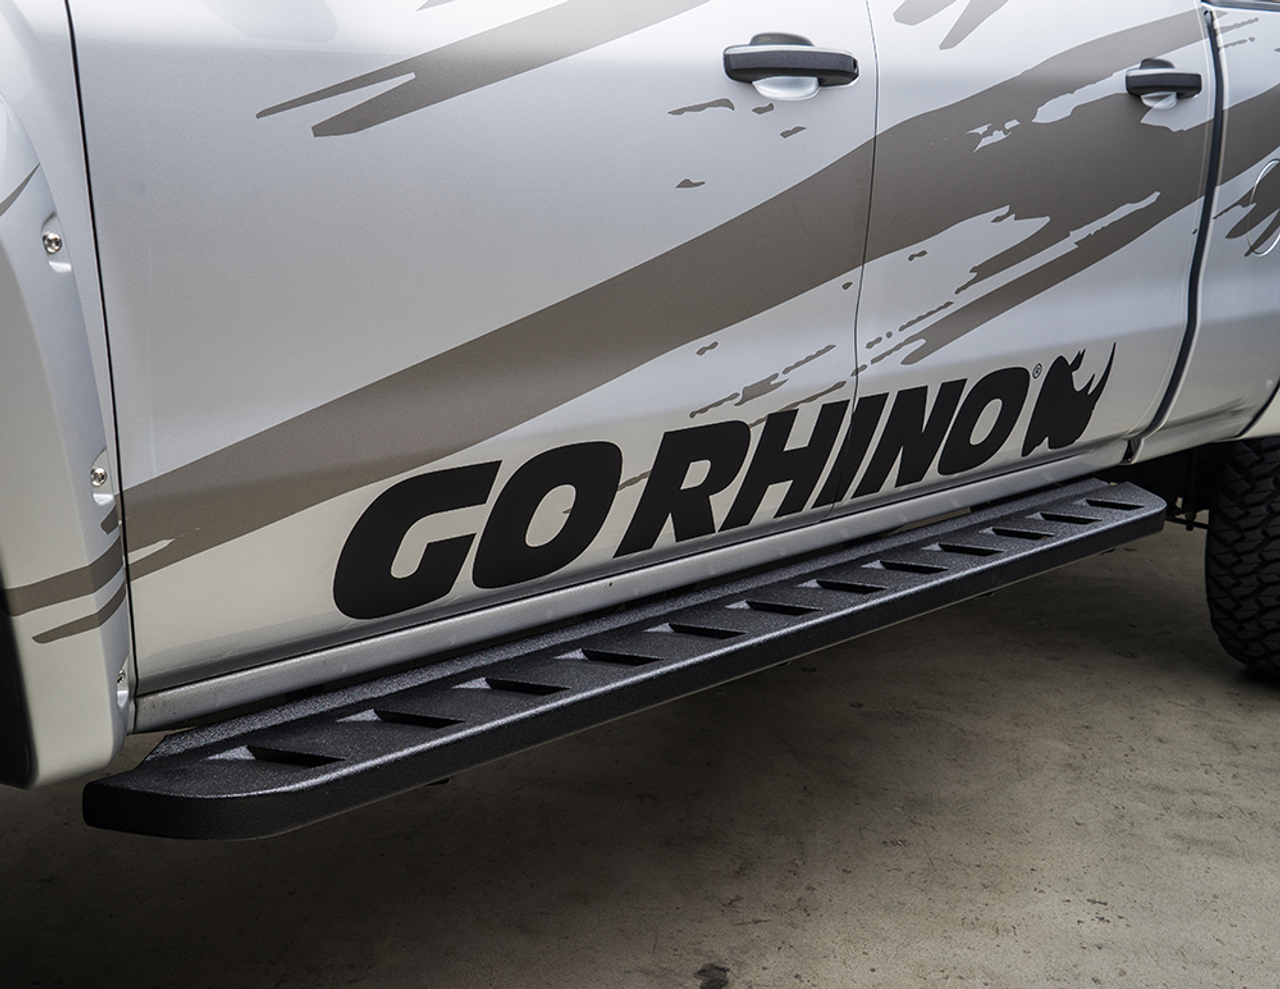 Go Rhino 6340478720T Chevy, Silverado 1500 LD (Classic), 2014-2019, RB10 Running boards - Kit: 2 pair RB10 Drop Steps, Galvanized Steel, Bedliner coating, 630087T RB10 + 6940475 RB Brackets + (2) 69420000T Drop Steps, Classic Body Style Only